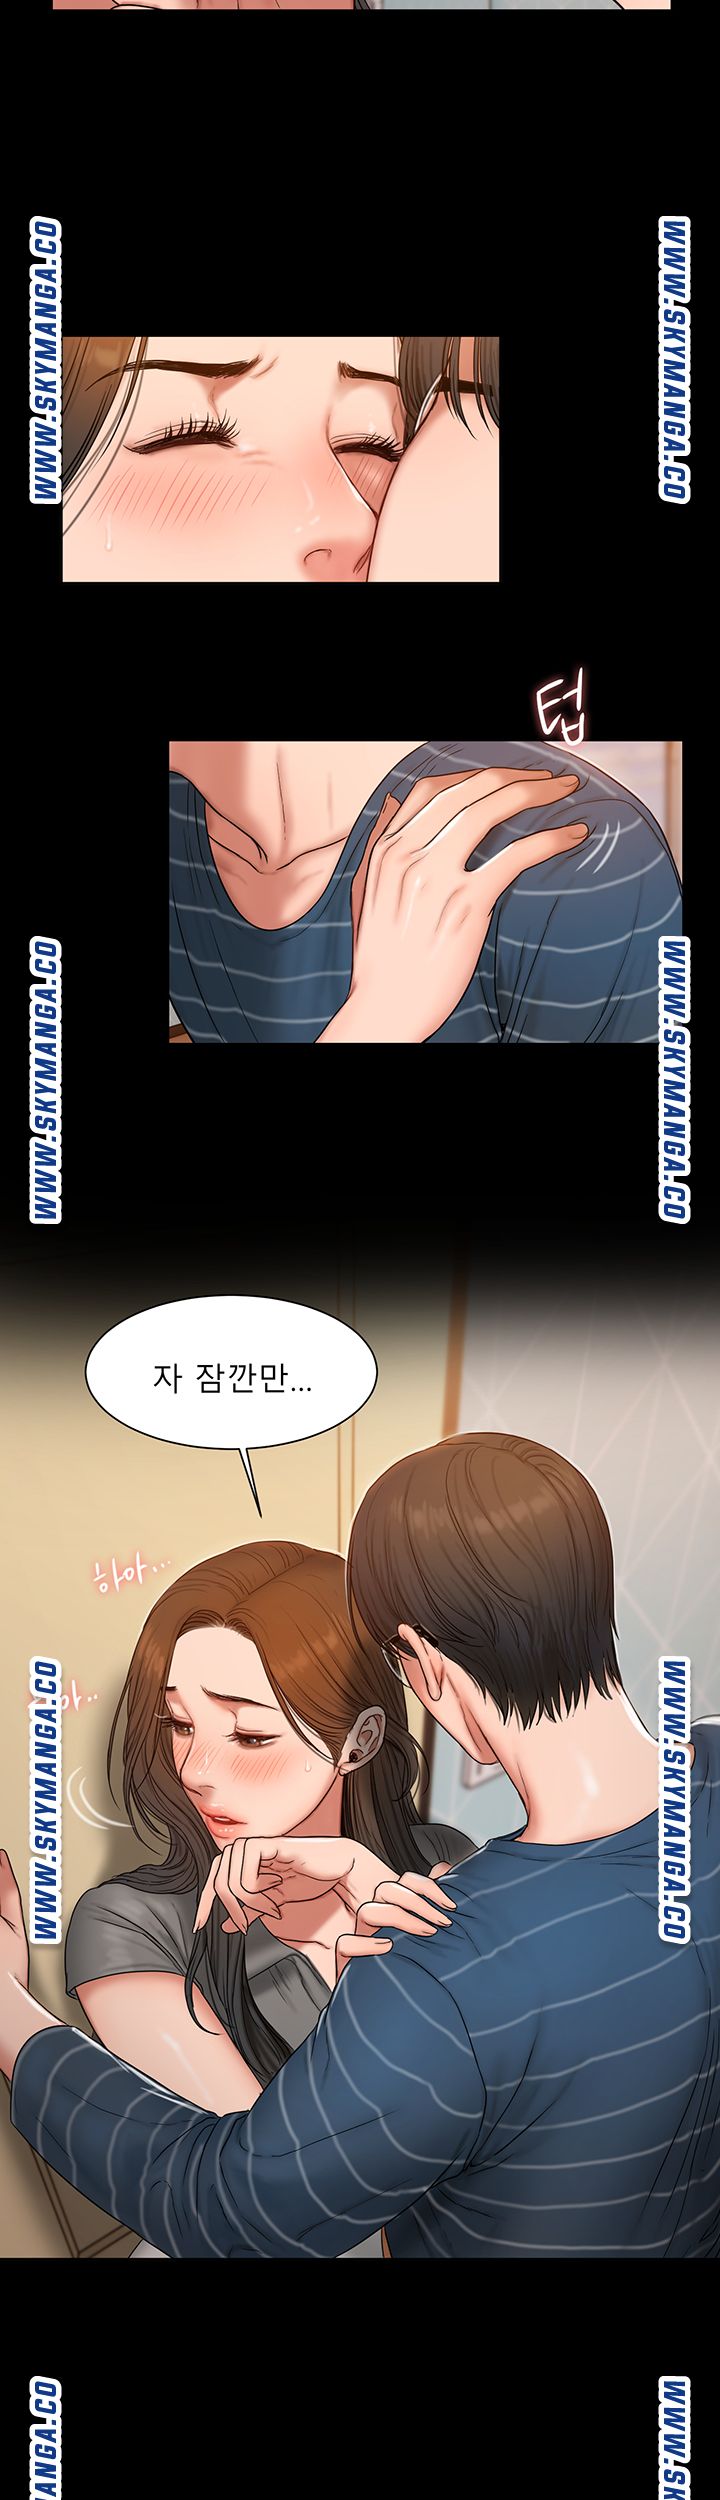 Friends Raw - Chapter 4 Page 4